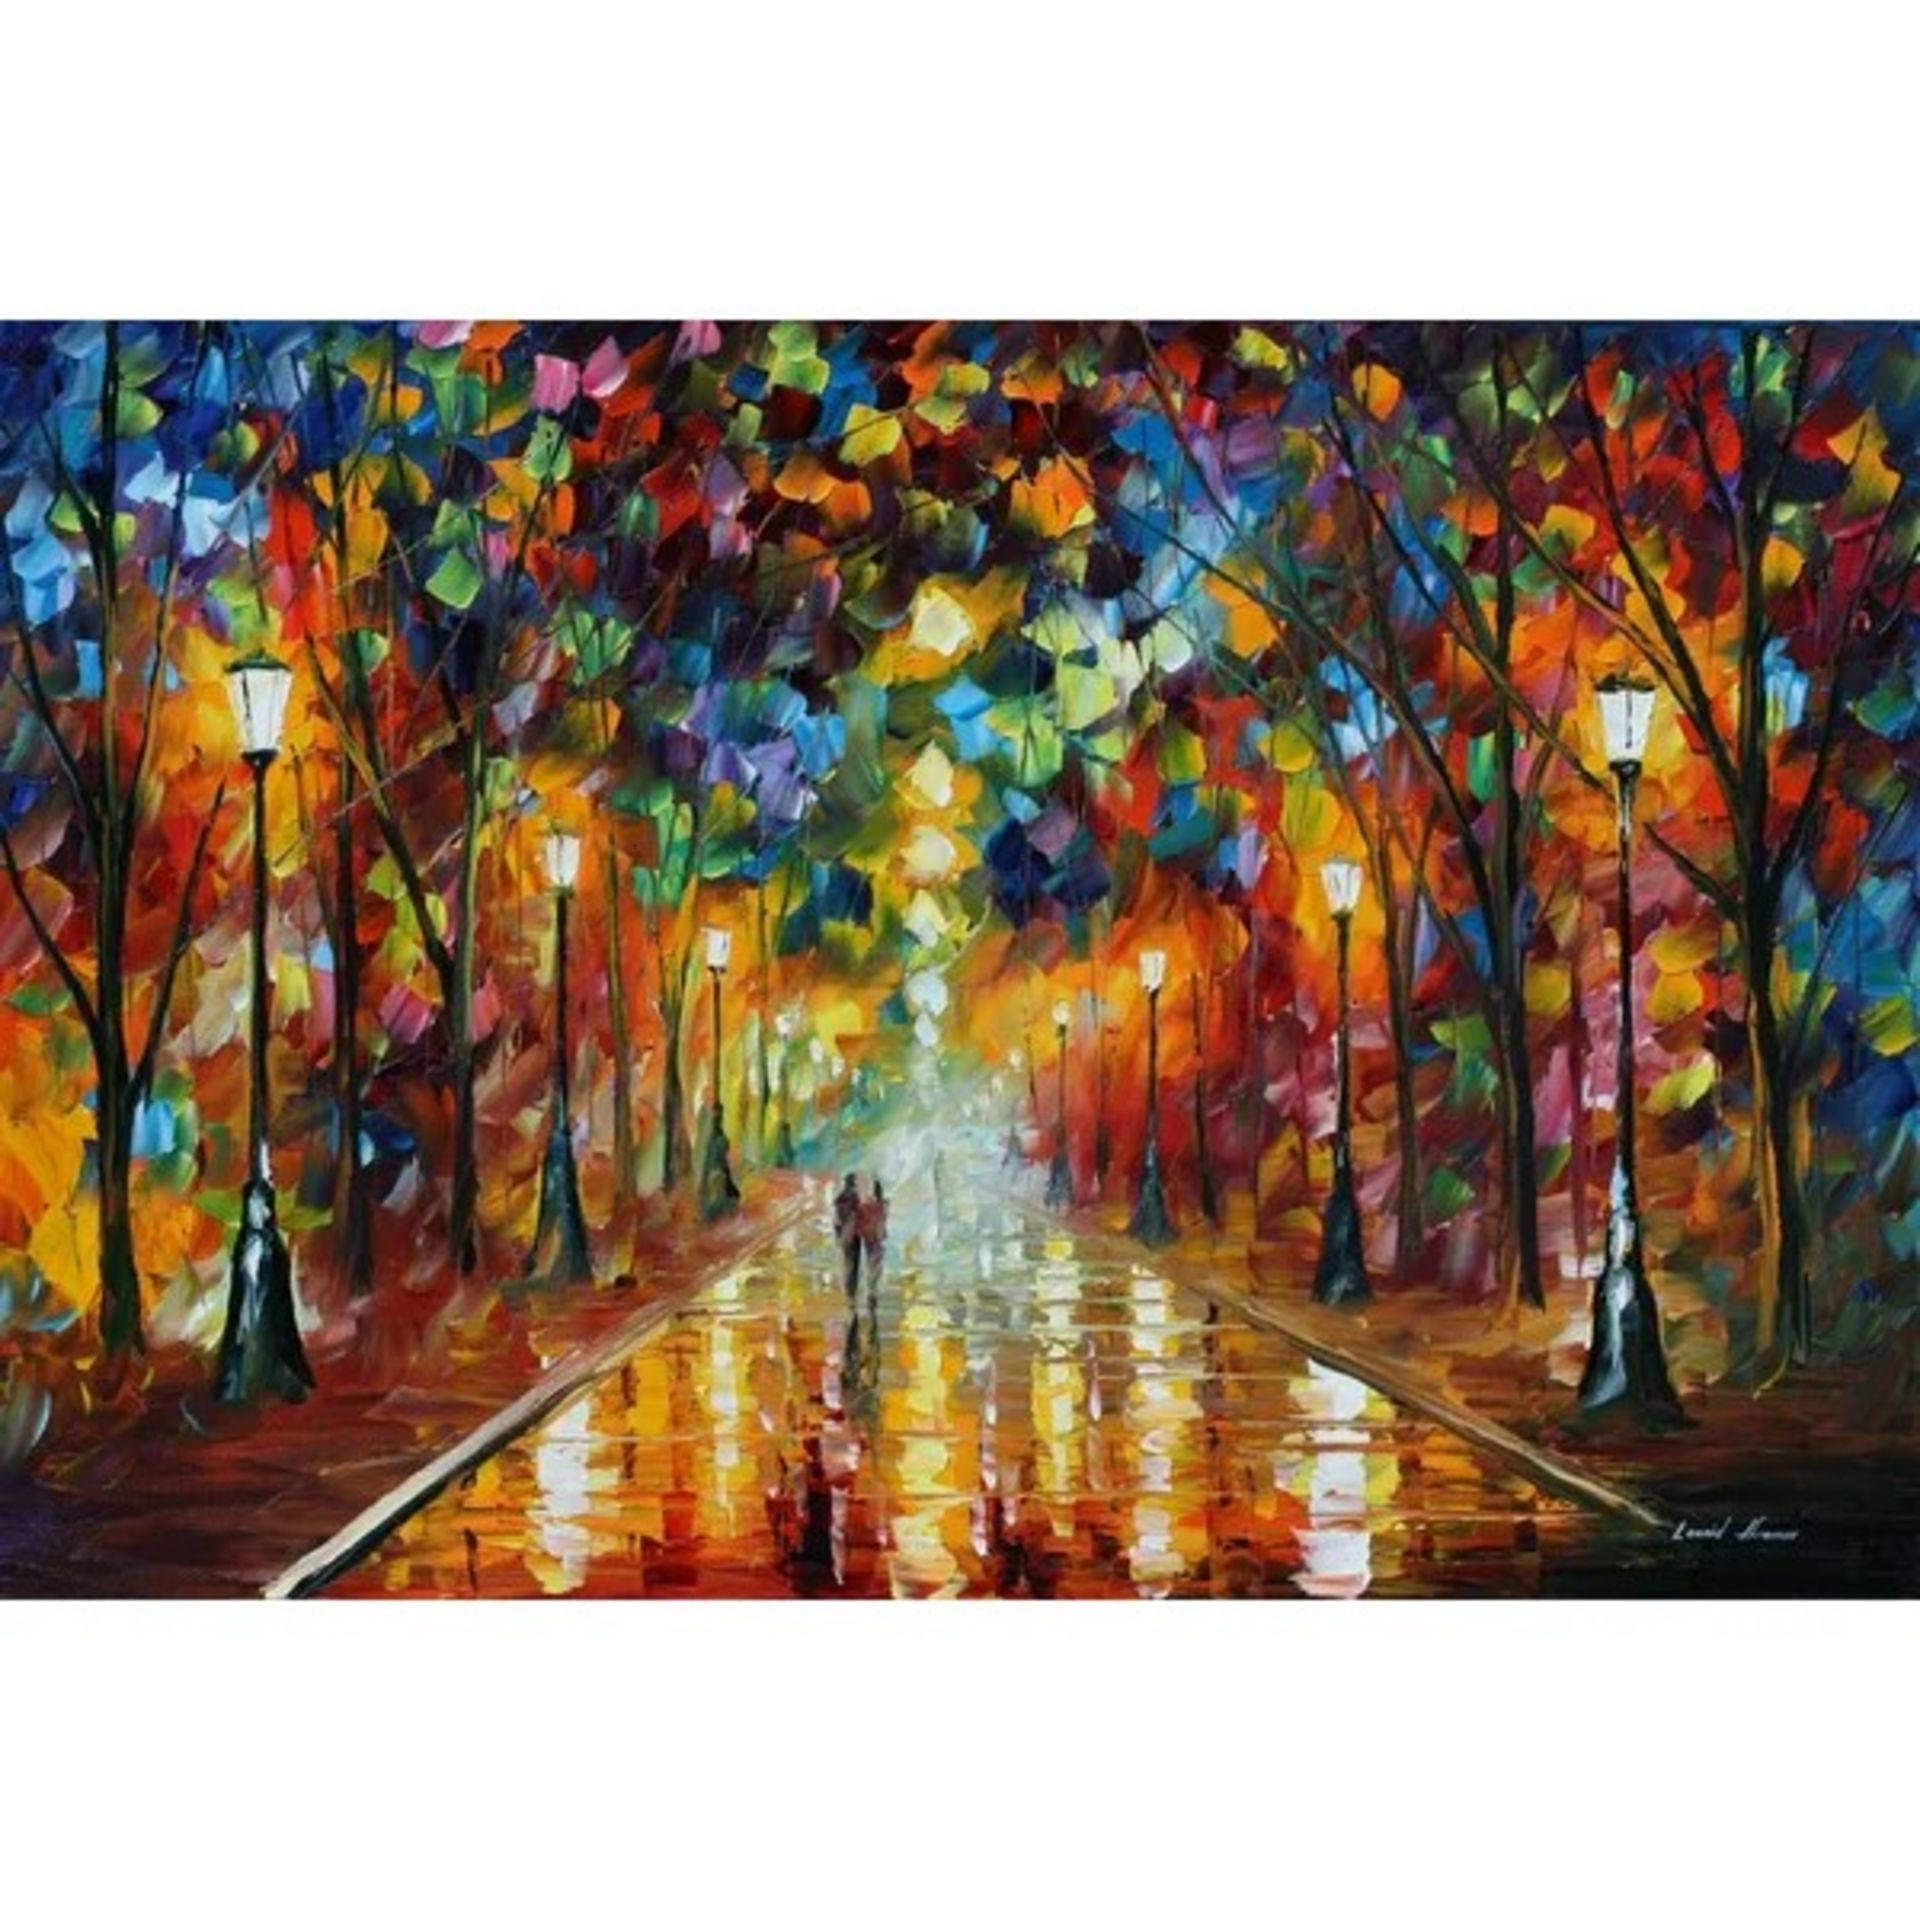 Farewell To Anger by Leonid Afremov - Print - RRP £45.99. - Image 2 of 2